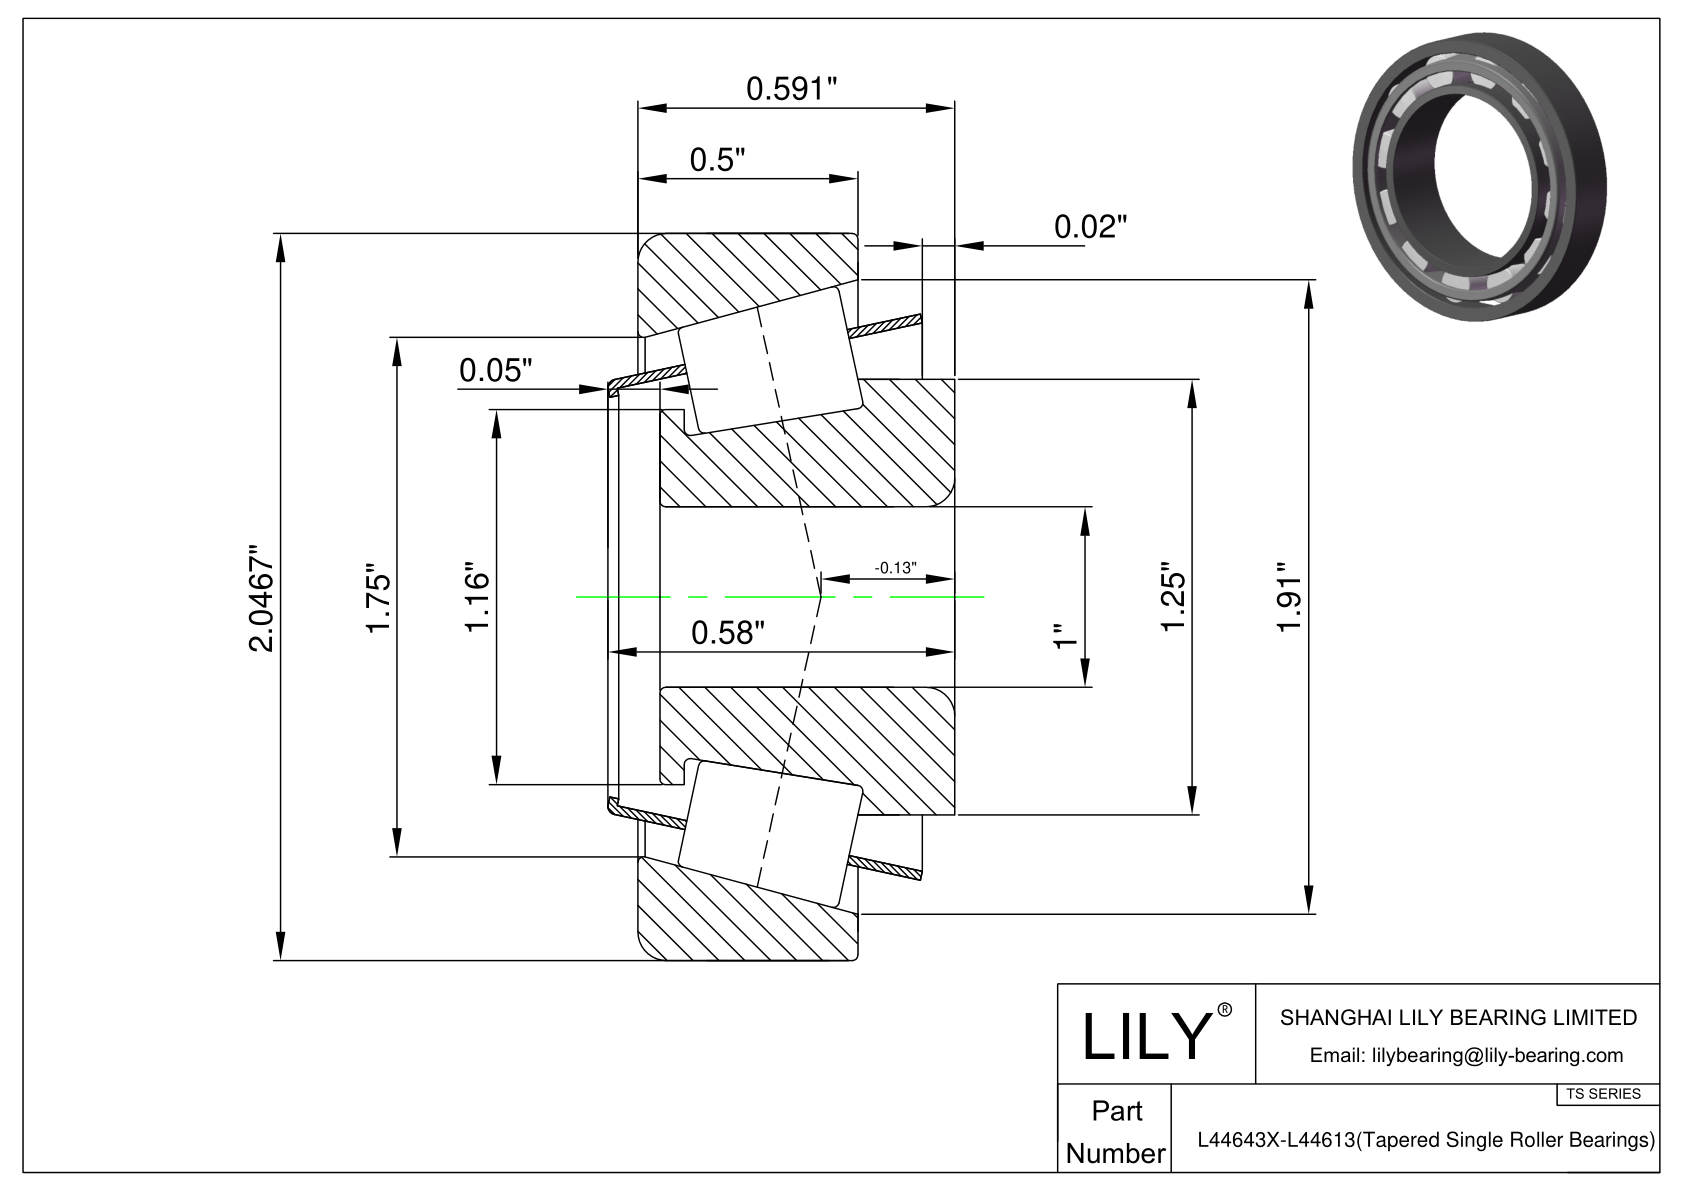 L44643X-L44613 TS (Tapered Single Roller Bearings) (Imperial) cad drawing